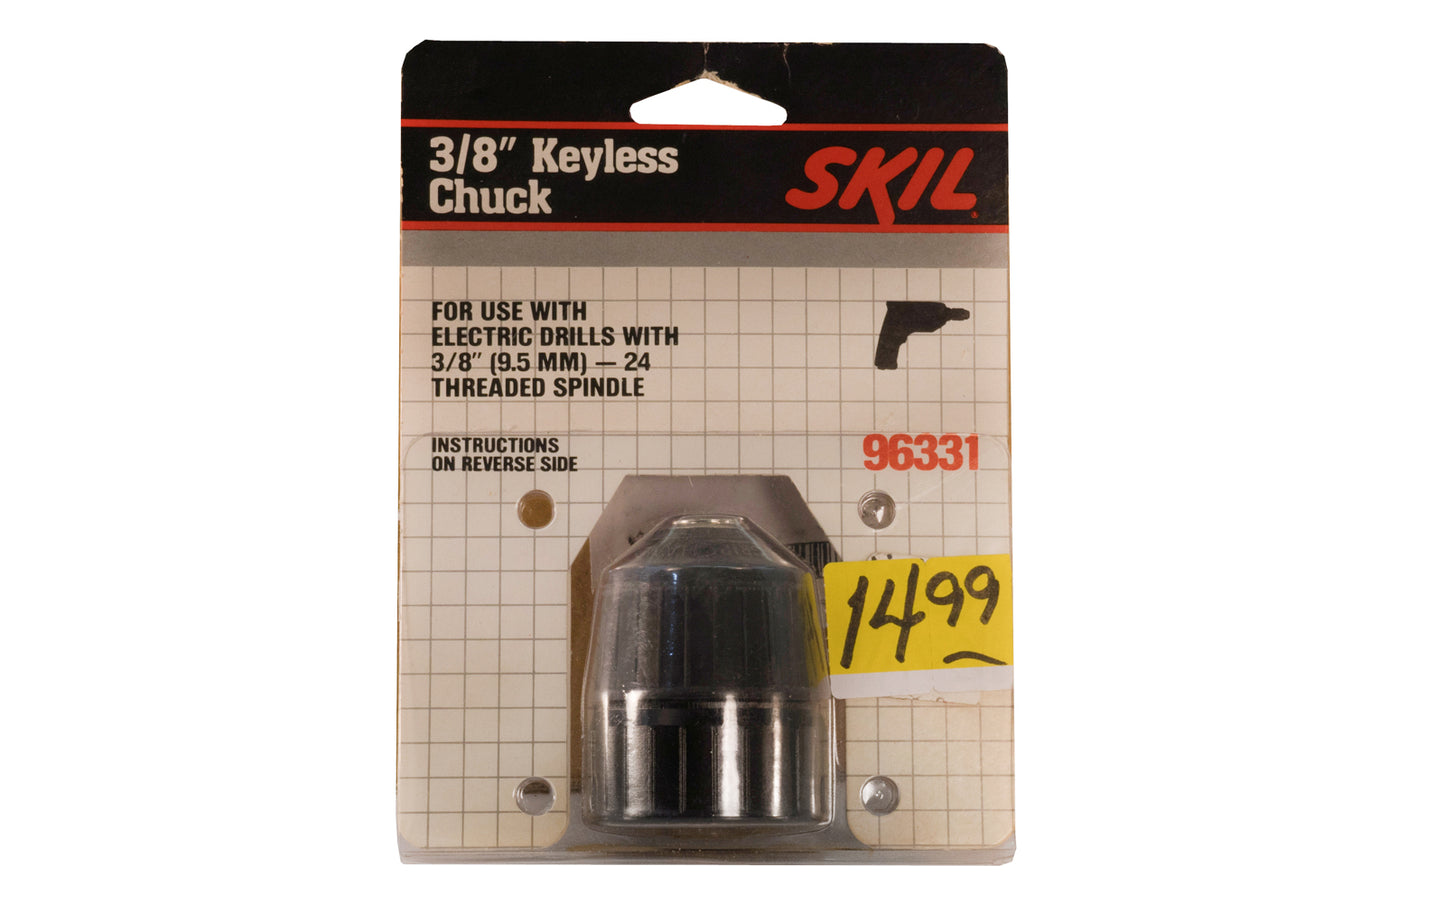 3/8" Skil Keyless Chuck - Made in USA. Model 96331. For use with electric drills with 3/8" - 24 (9.5 mm) threaded spindle. 039725963314